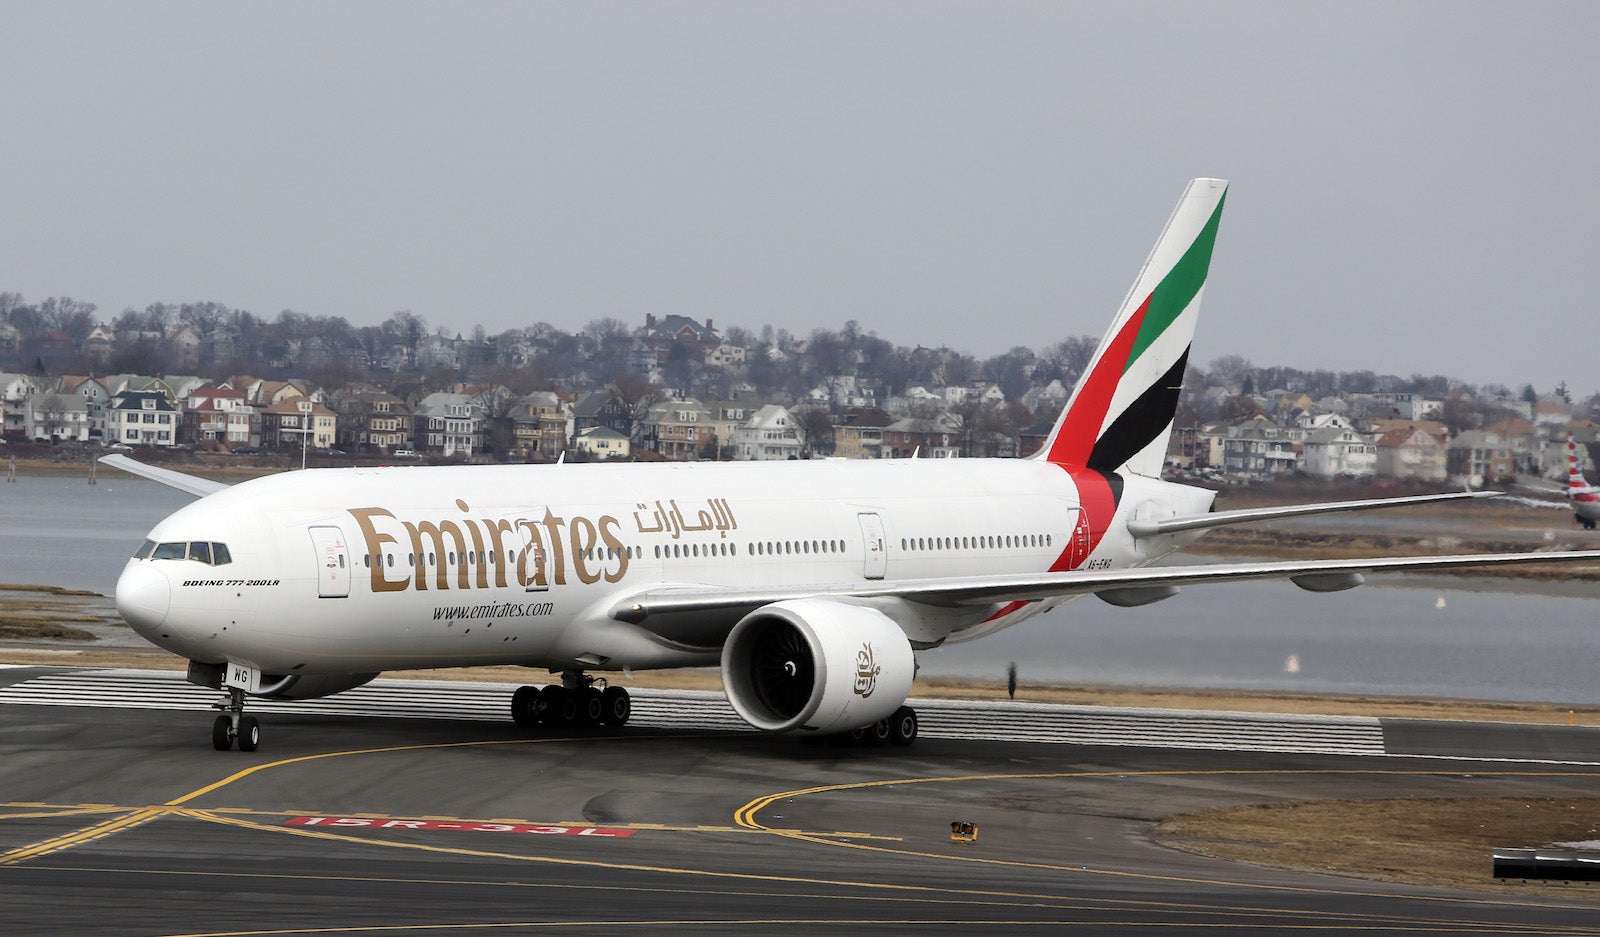 (Boston, MA, 03/10/14) Emirates Airline's Boeing 777-200LR taxis to the gate after landing for the first time at Logan airport launching the airline's new service out of Boston. Monday, March 10, 2014. Staff photo by John Wilcox.